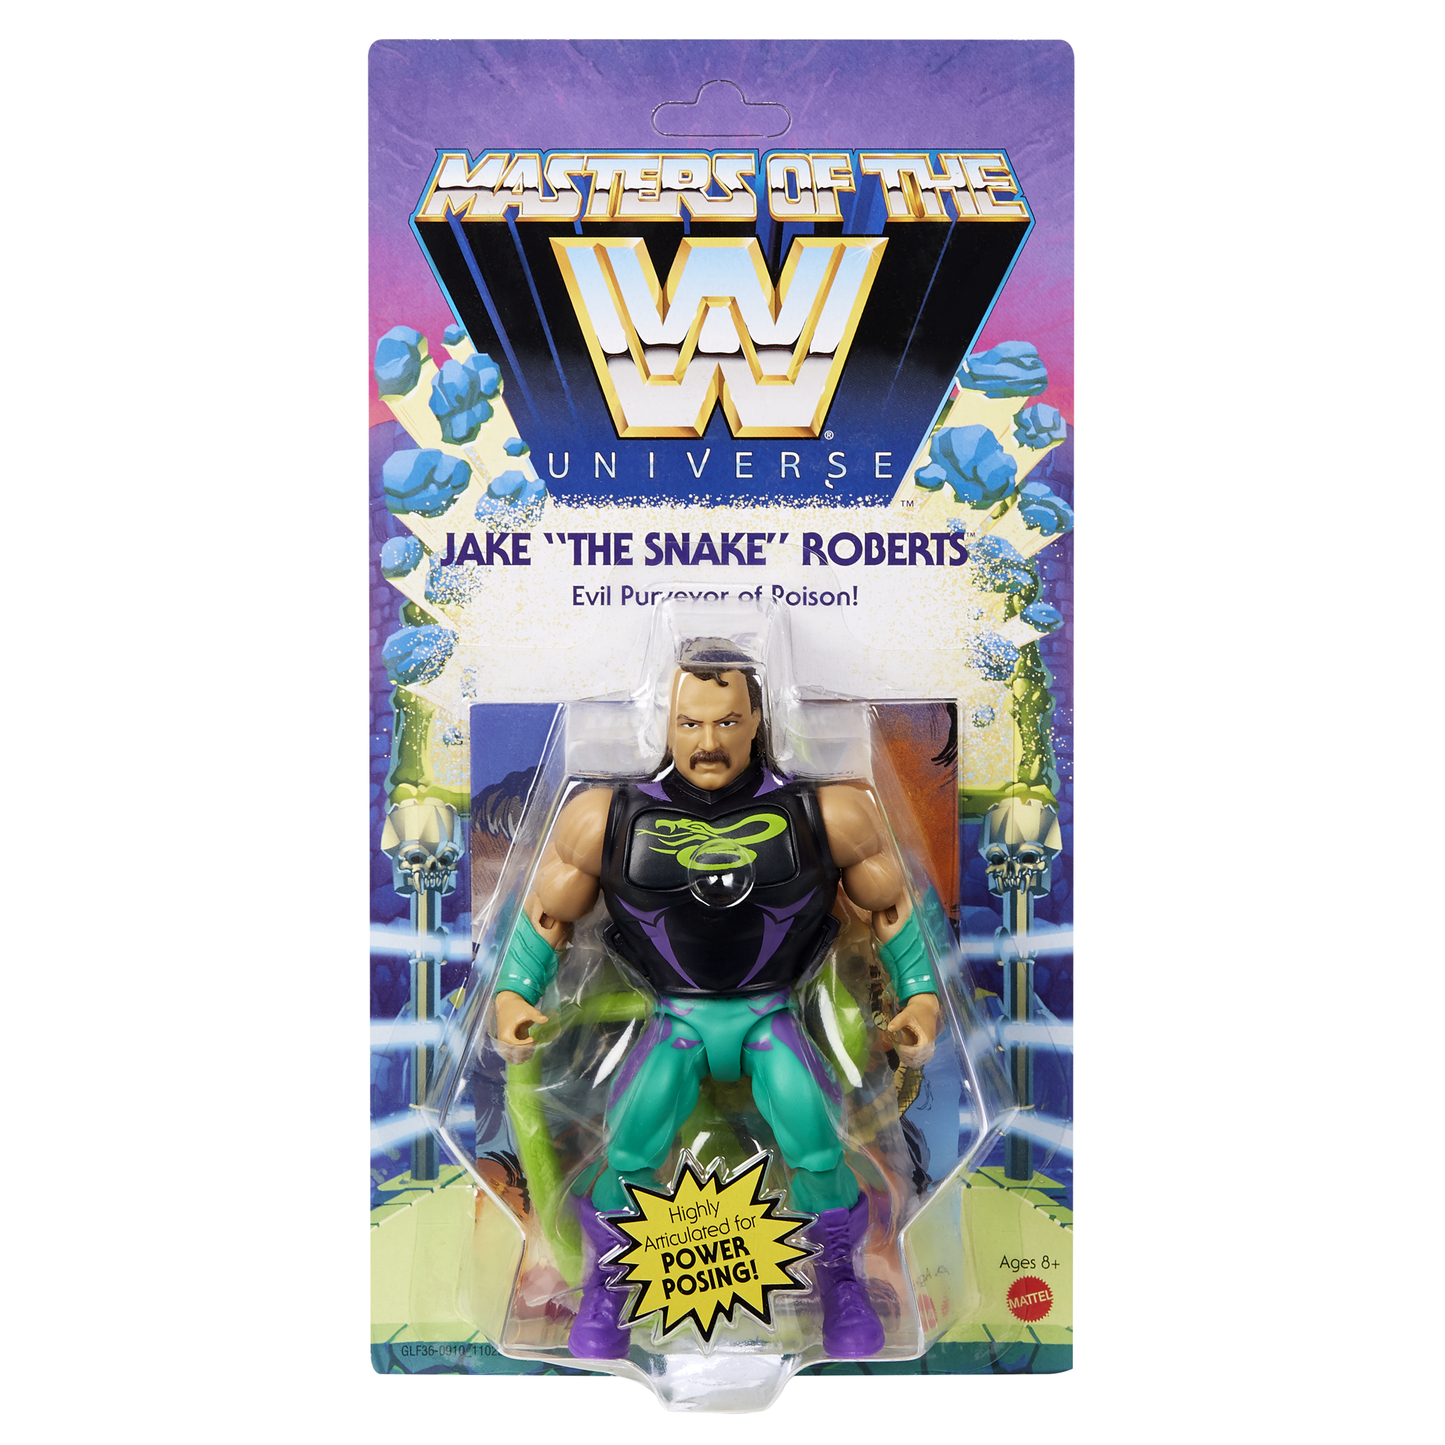 2020 Mattel Masters of the WWE Universe Series 4 Jake "The Snake" Roberts [Exclusive]